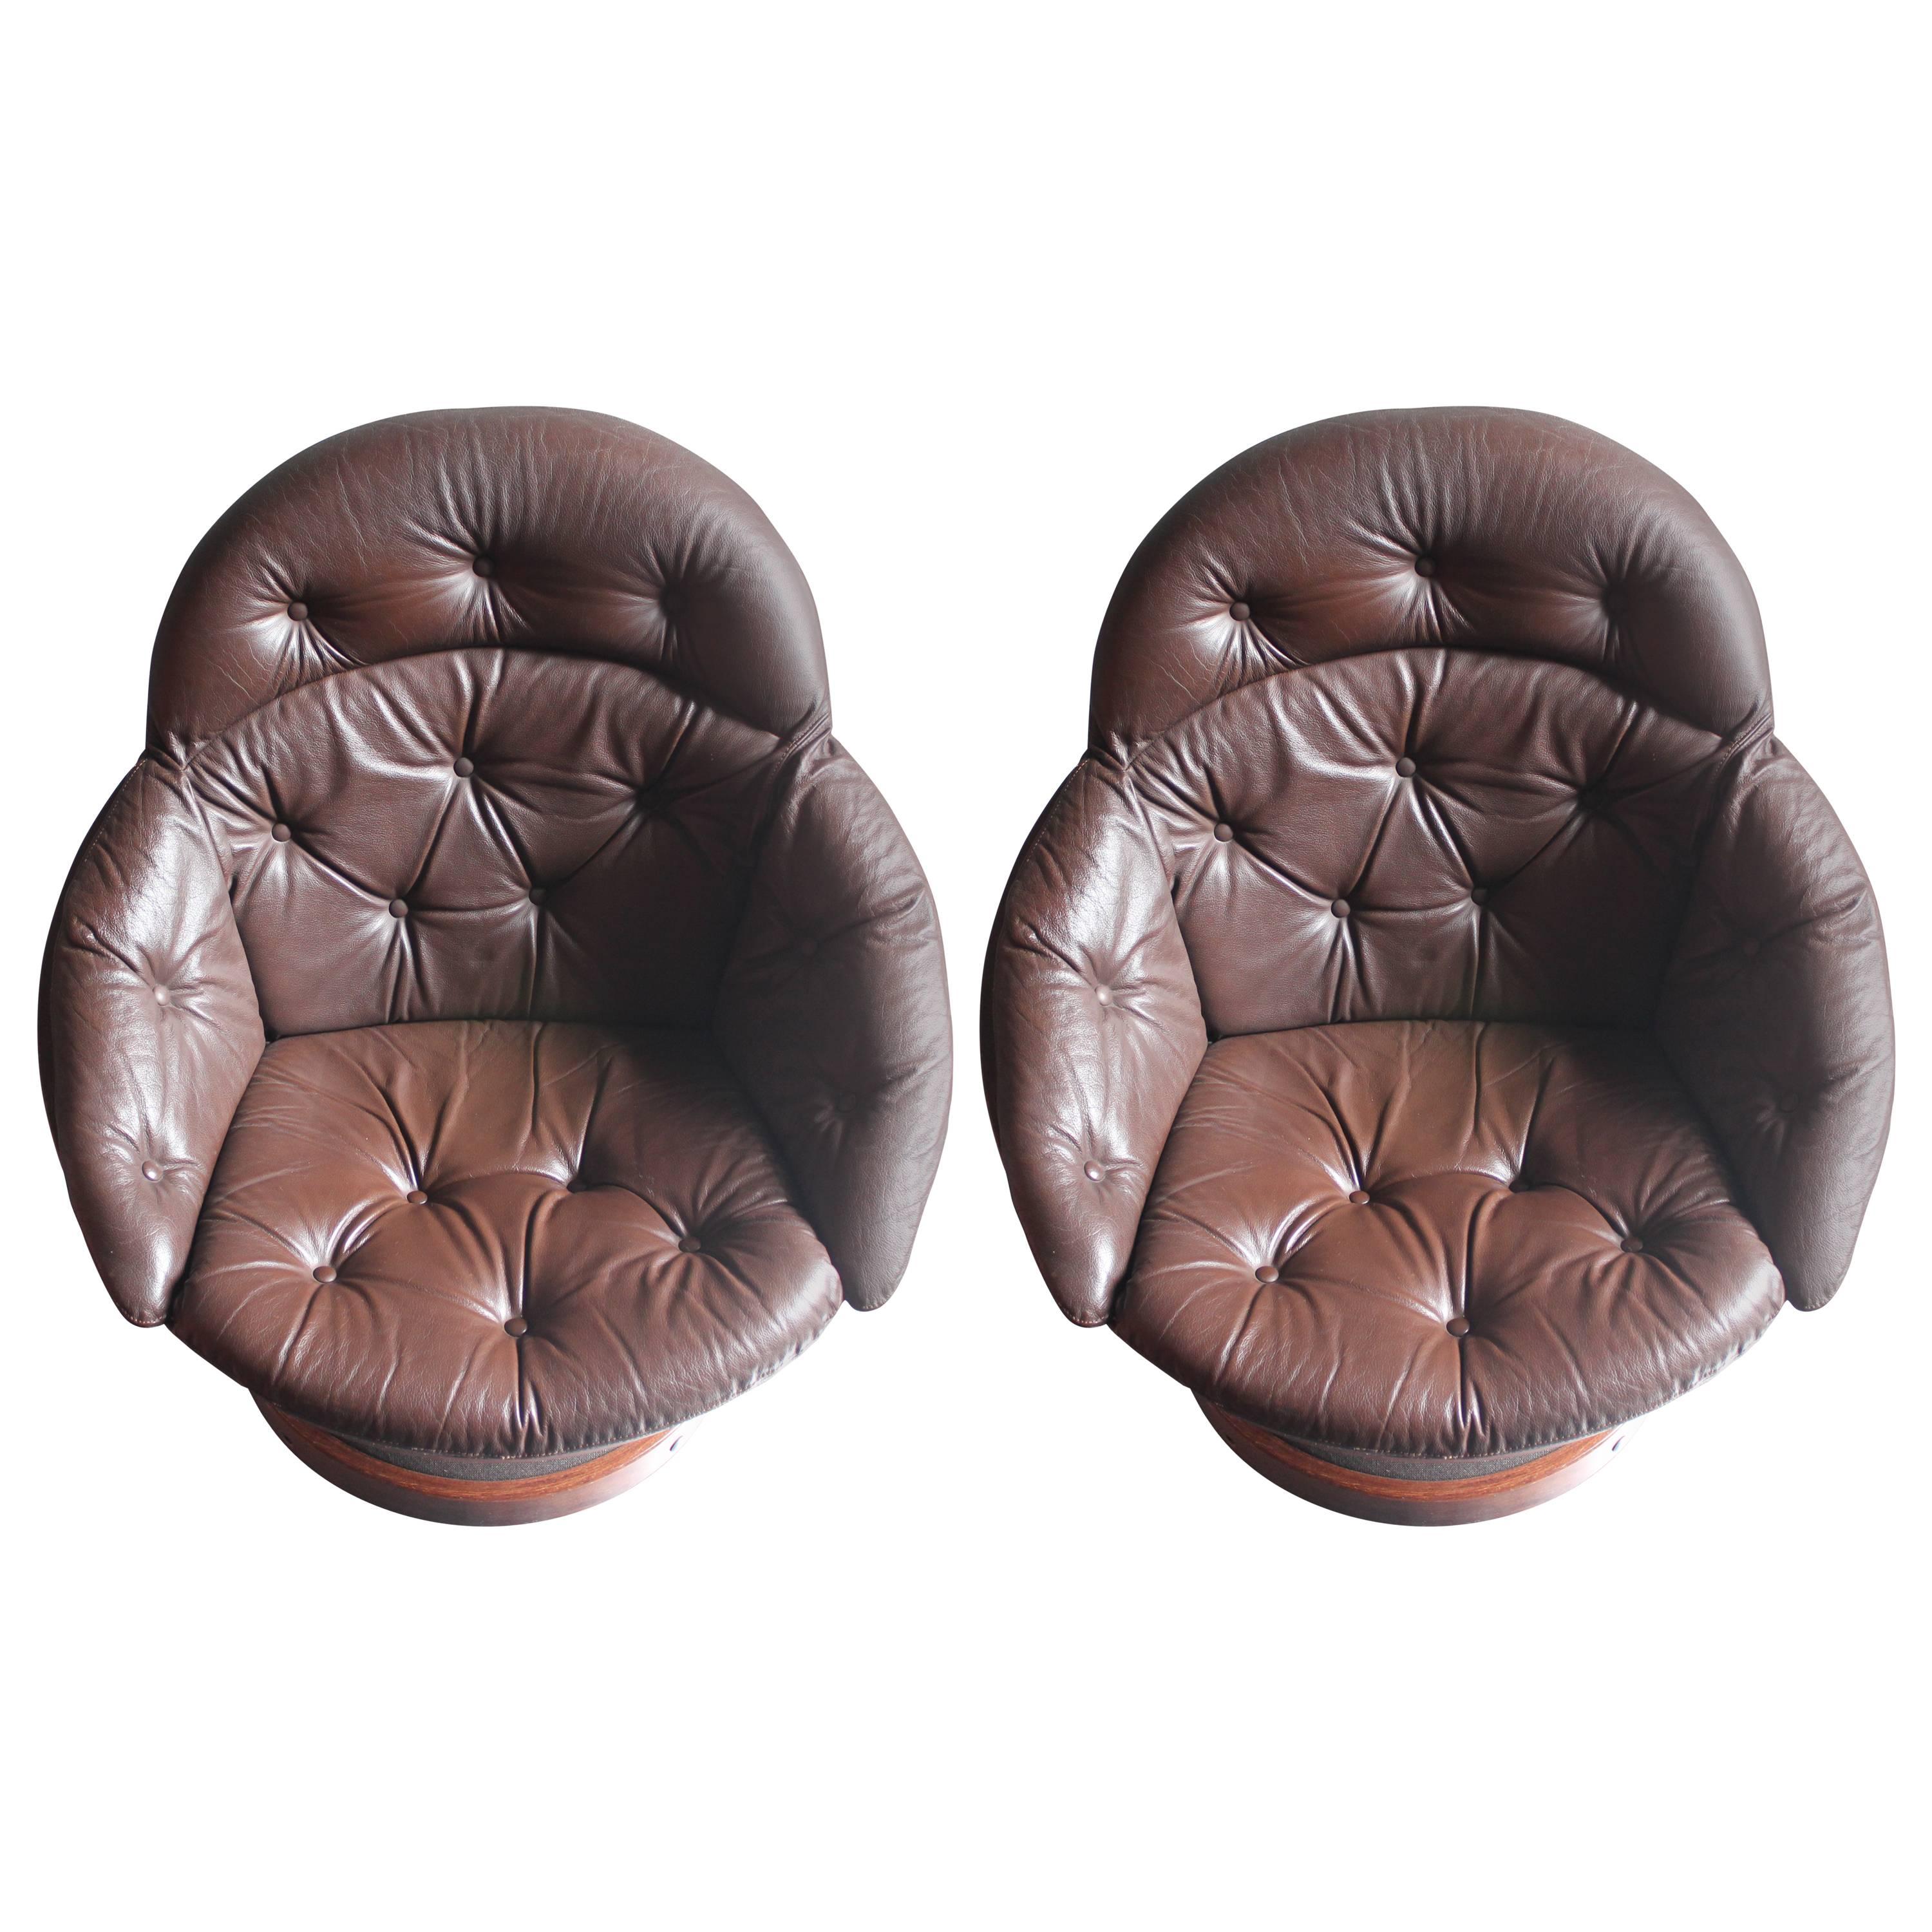 Rare Swivel Chairs in Original Leather Upholstery by Soda Galvano For Sale